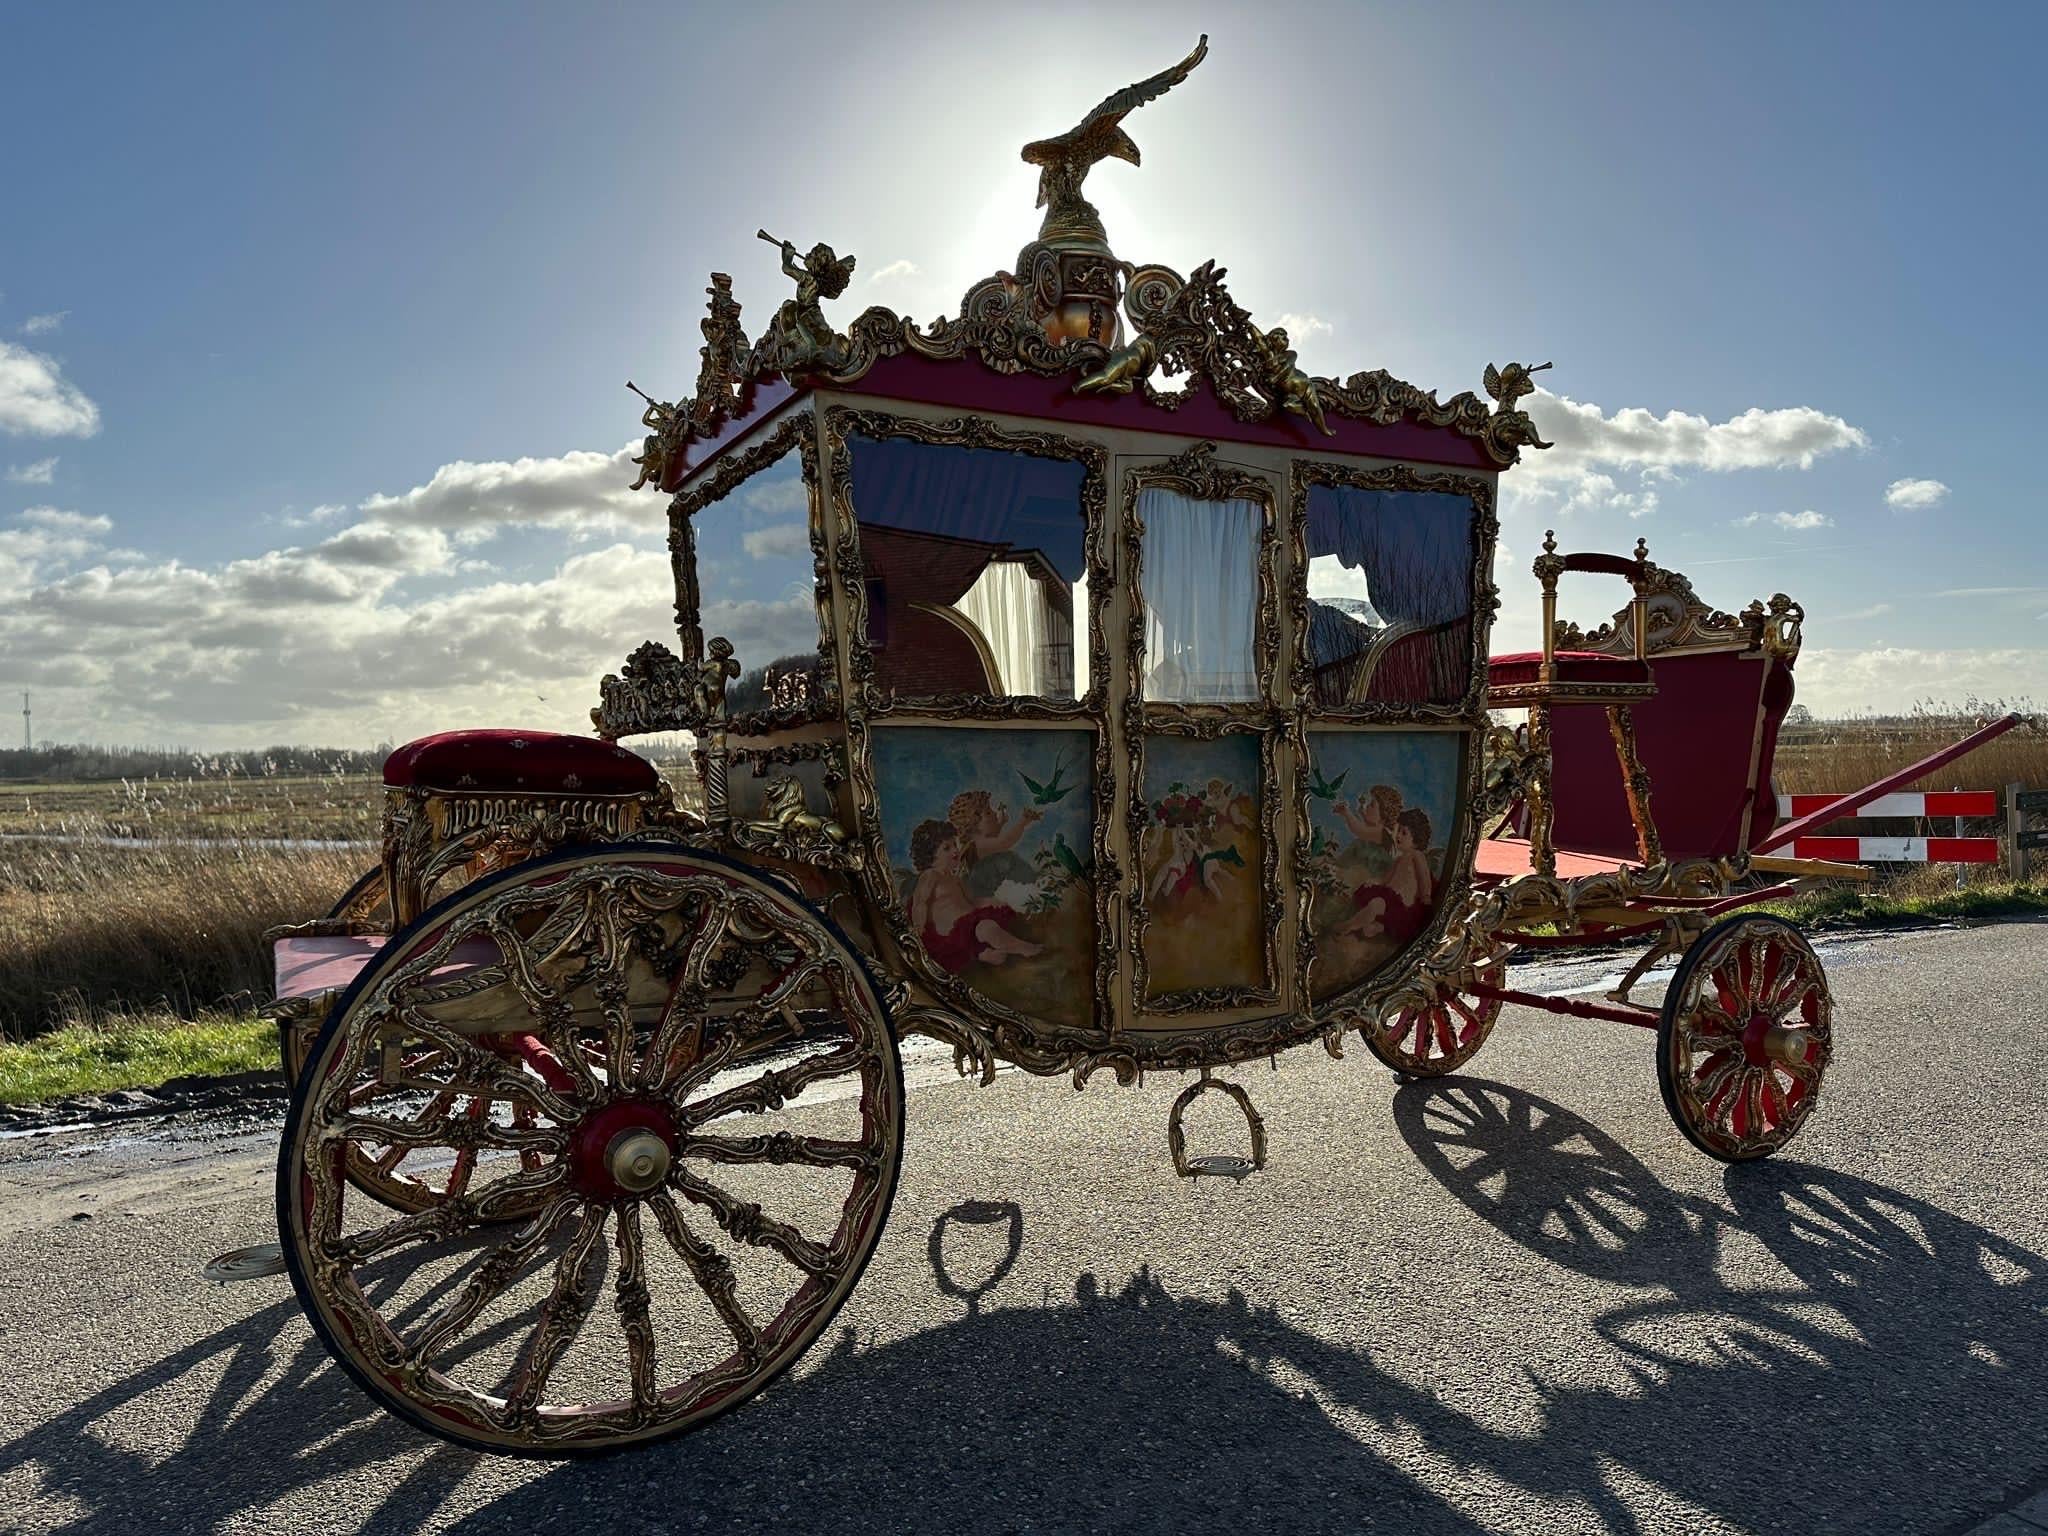 Introducing the epitome of regal elegance and opulence, behold the majestic royal carriage. This exquisite masterpiece of craftsmanship and design stands as a symbol of prestige and grandeur. 

From the moment you lay eyes on it, the carriage's